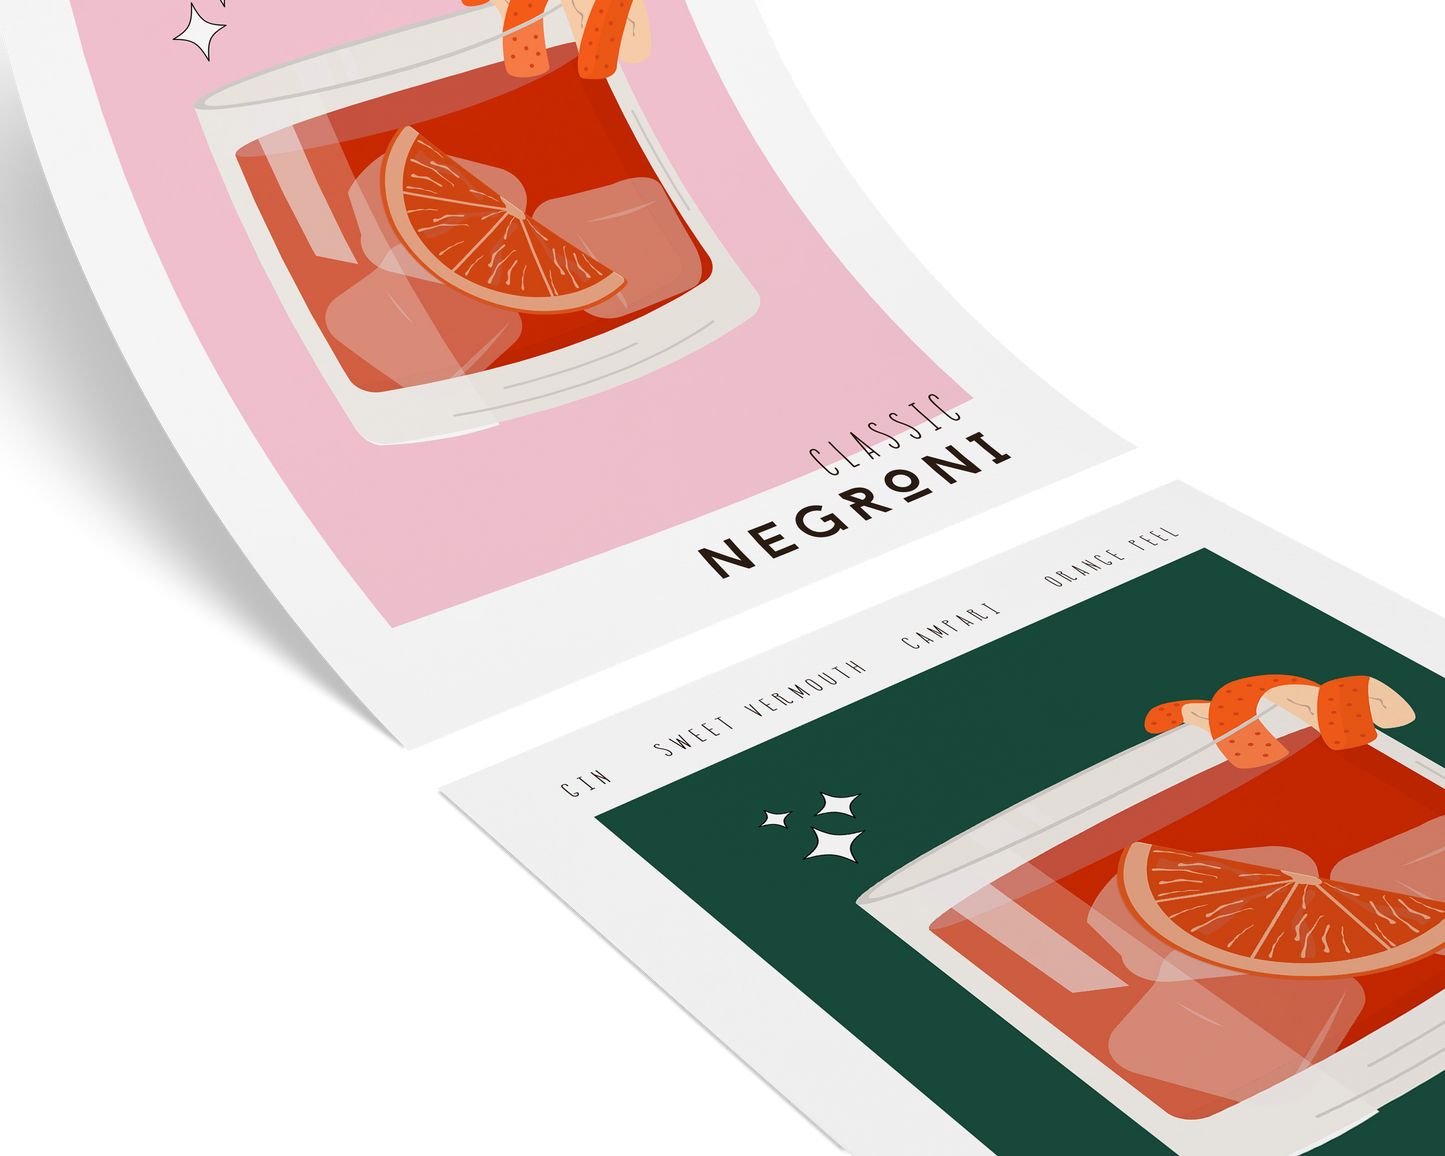 Negroni Cocktail Poster